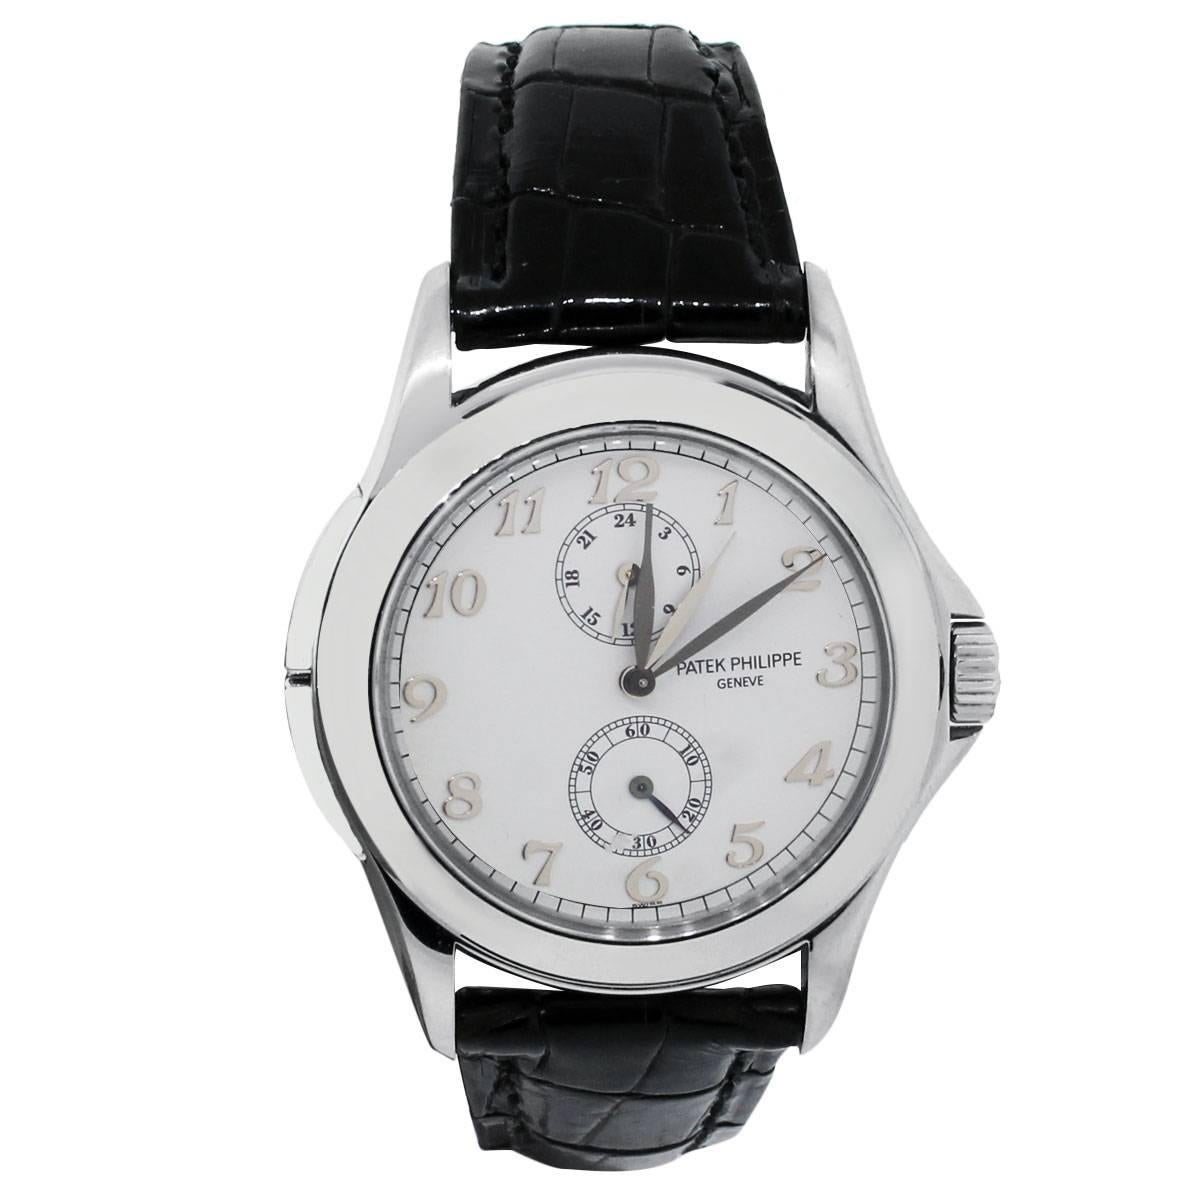 Brand: Patek Philippe
MPN: 5134
Model: Travel Time
Case Material: 18k white gold
Case Diameter: 38mm
Crystal: Sapphire crystal (scratch resistant)
Bezel: 18k white gold smooth bezel
Dial: White dial with white gold hour markers and hands. Sub dial